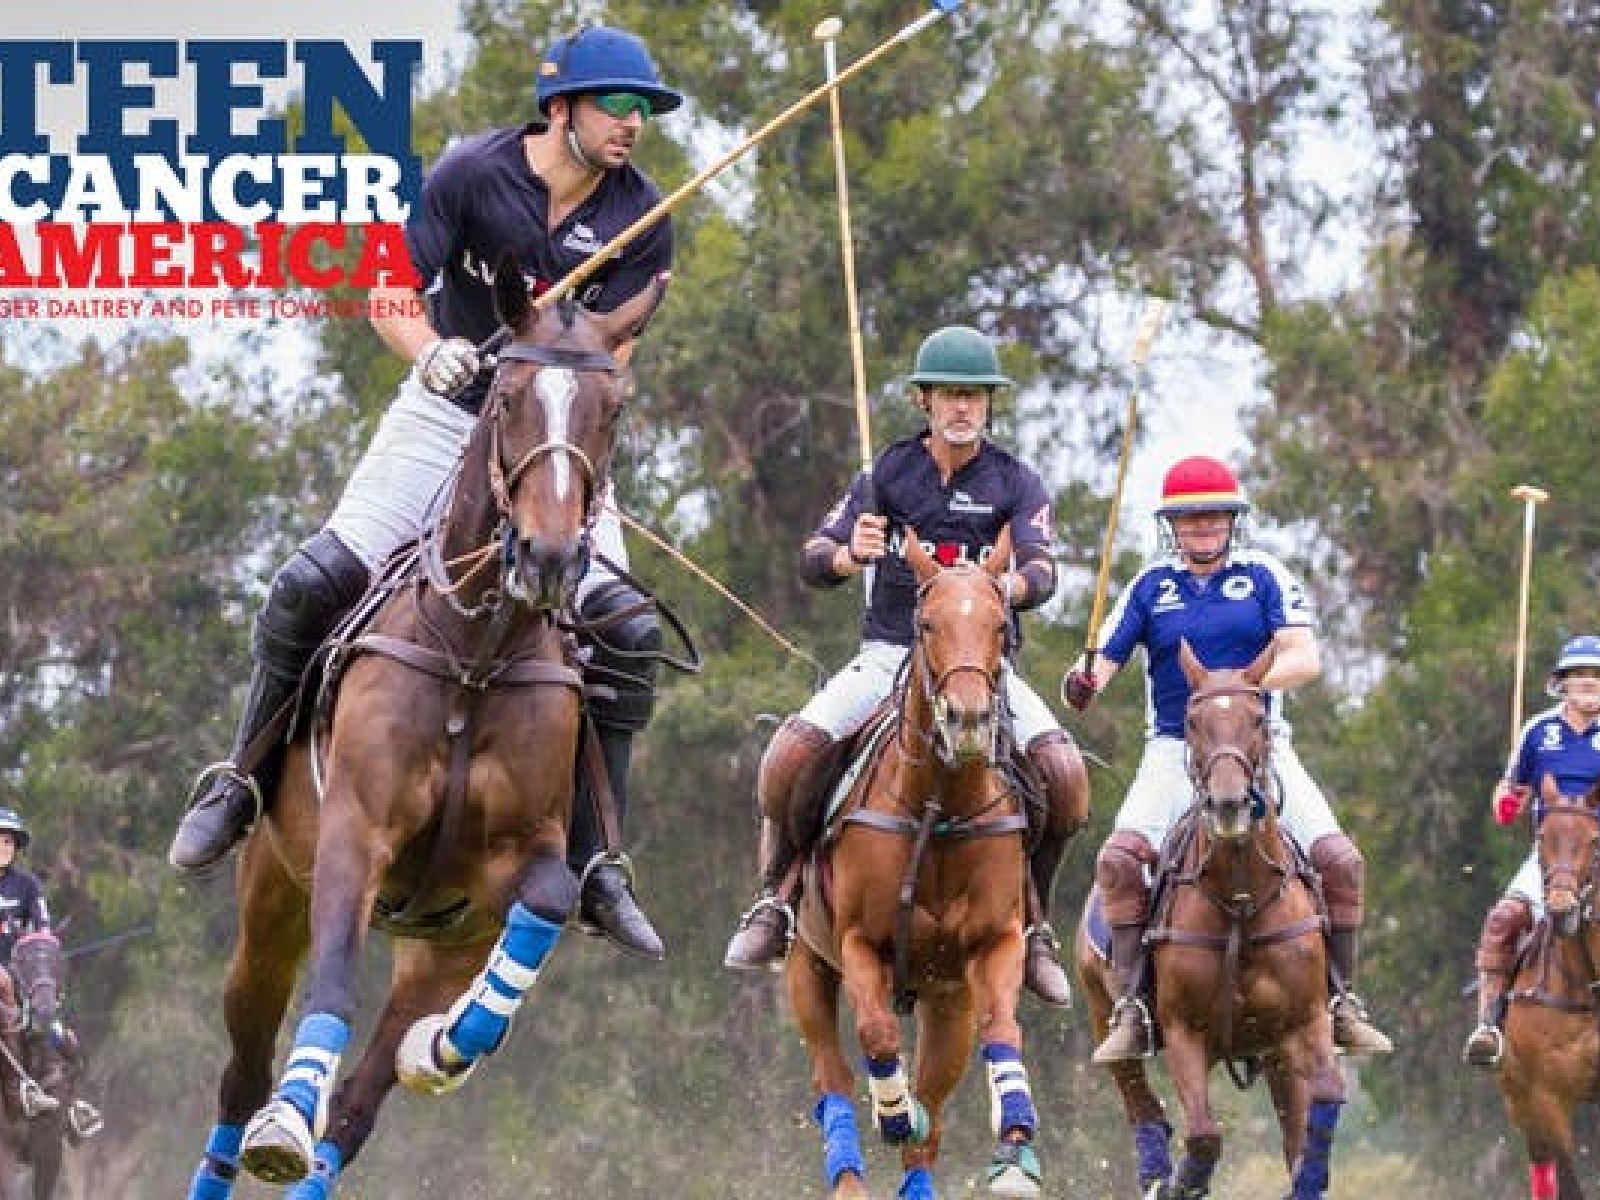 Teen Cancer America Polo Fundraiser Discover Los Angeles